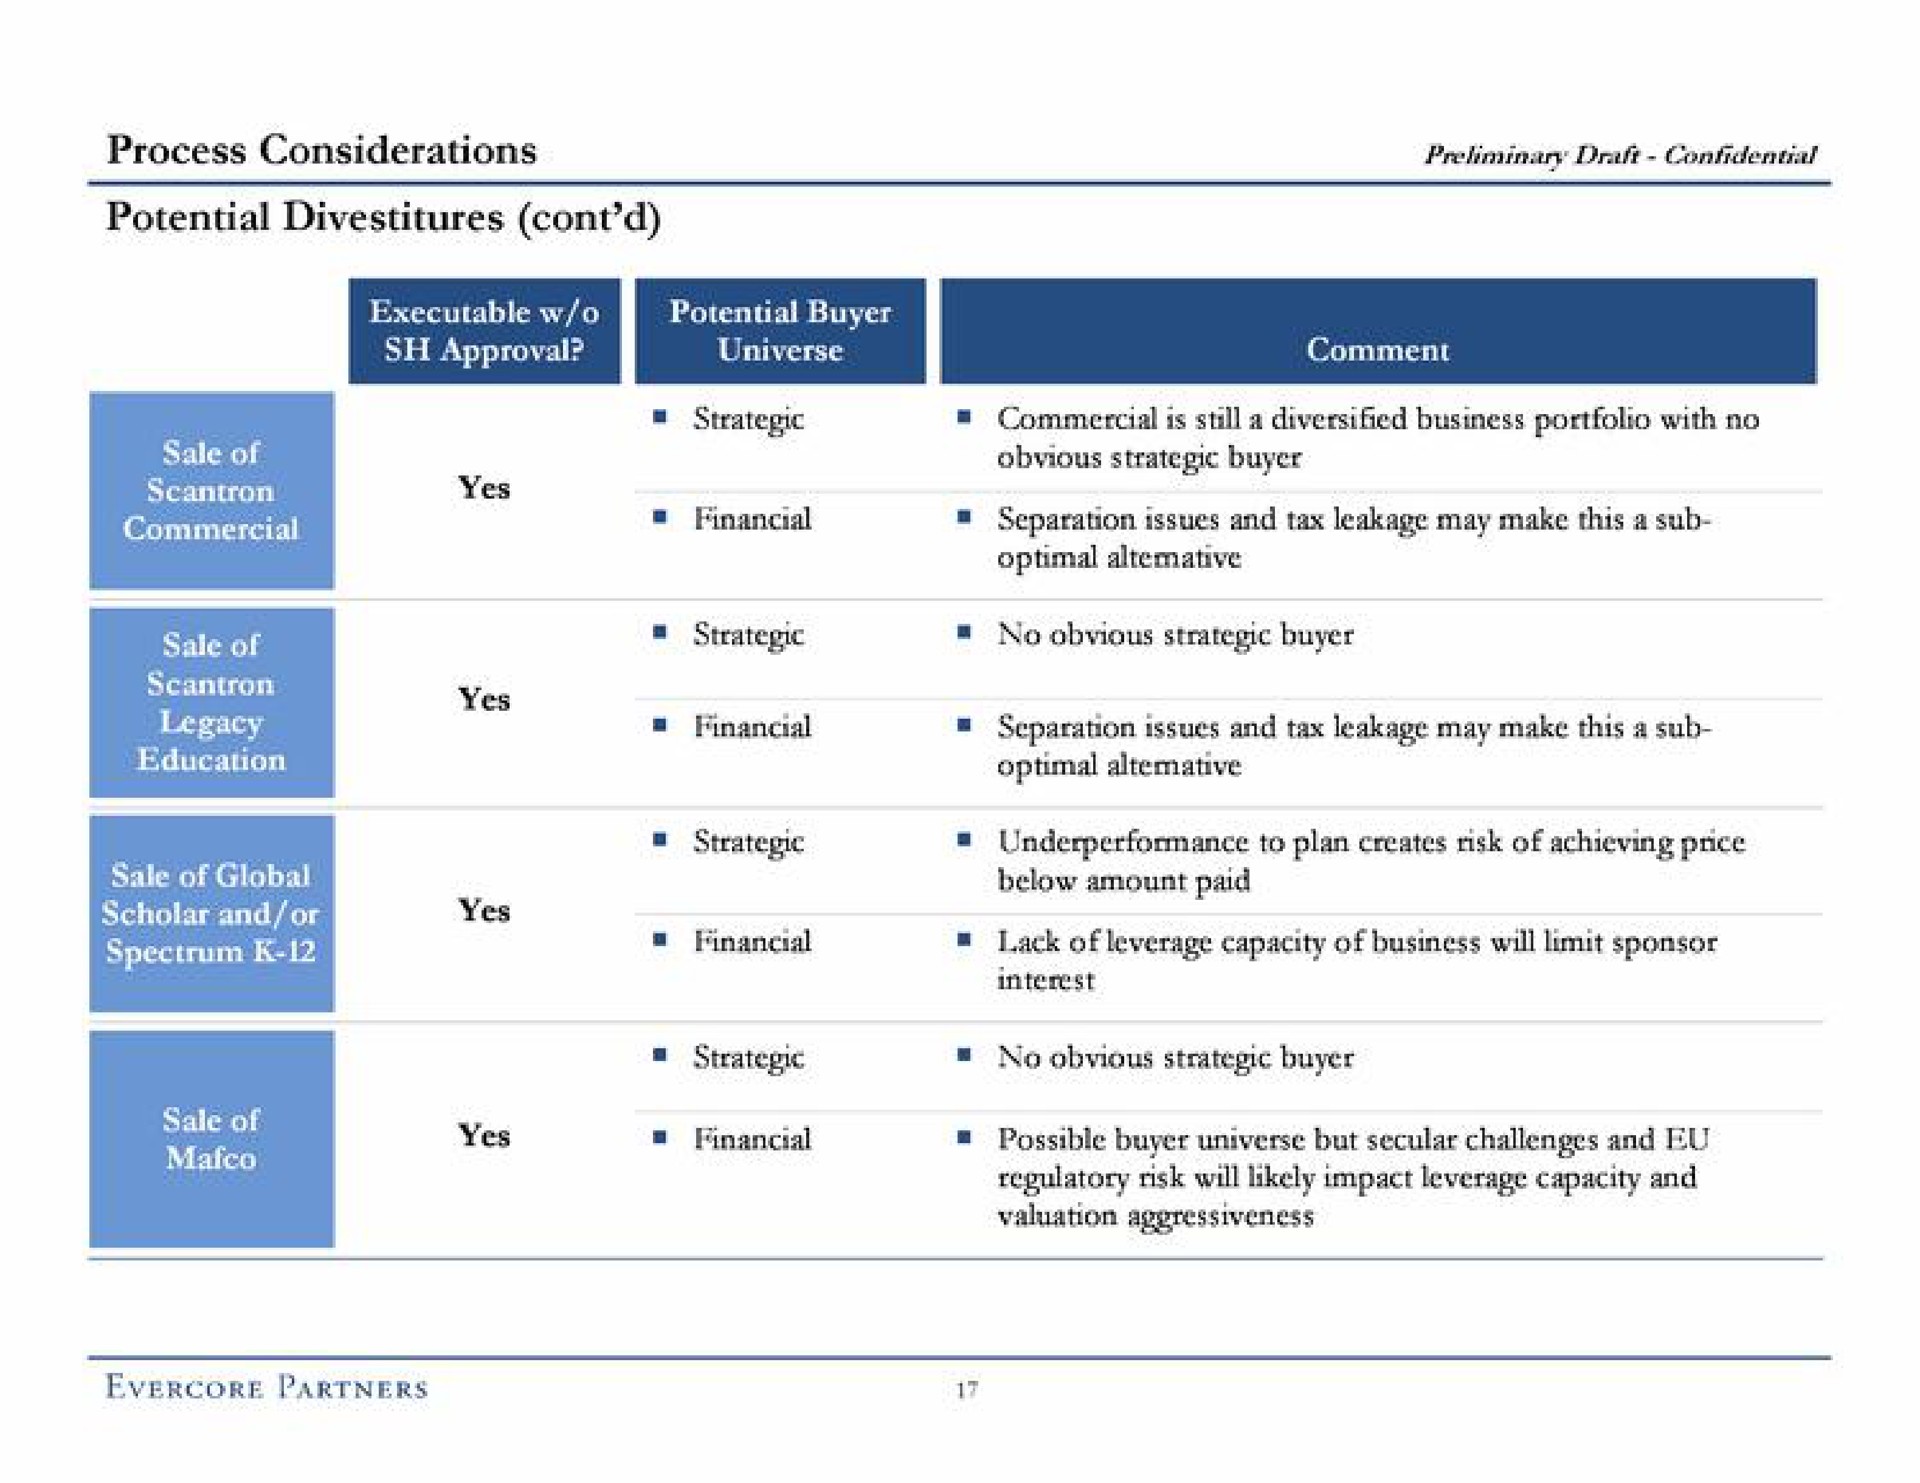 process considerations potential divestitures preliminary draft confidential sale of soe education me mele scholar and or spectrum yes wine yes obvious strategic buyer financial separation issues and tax leakage may make this a sub financial financial separation issues and tax leakage may make this a sub optimal below amount paid lack of leverage capacity of business will limit sponsor regulatory risk will likely impact capacity and valuation | Evercore